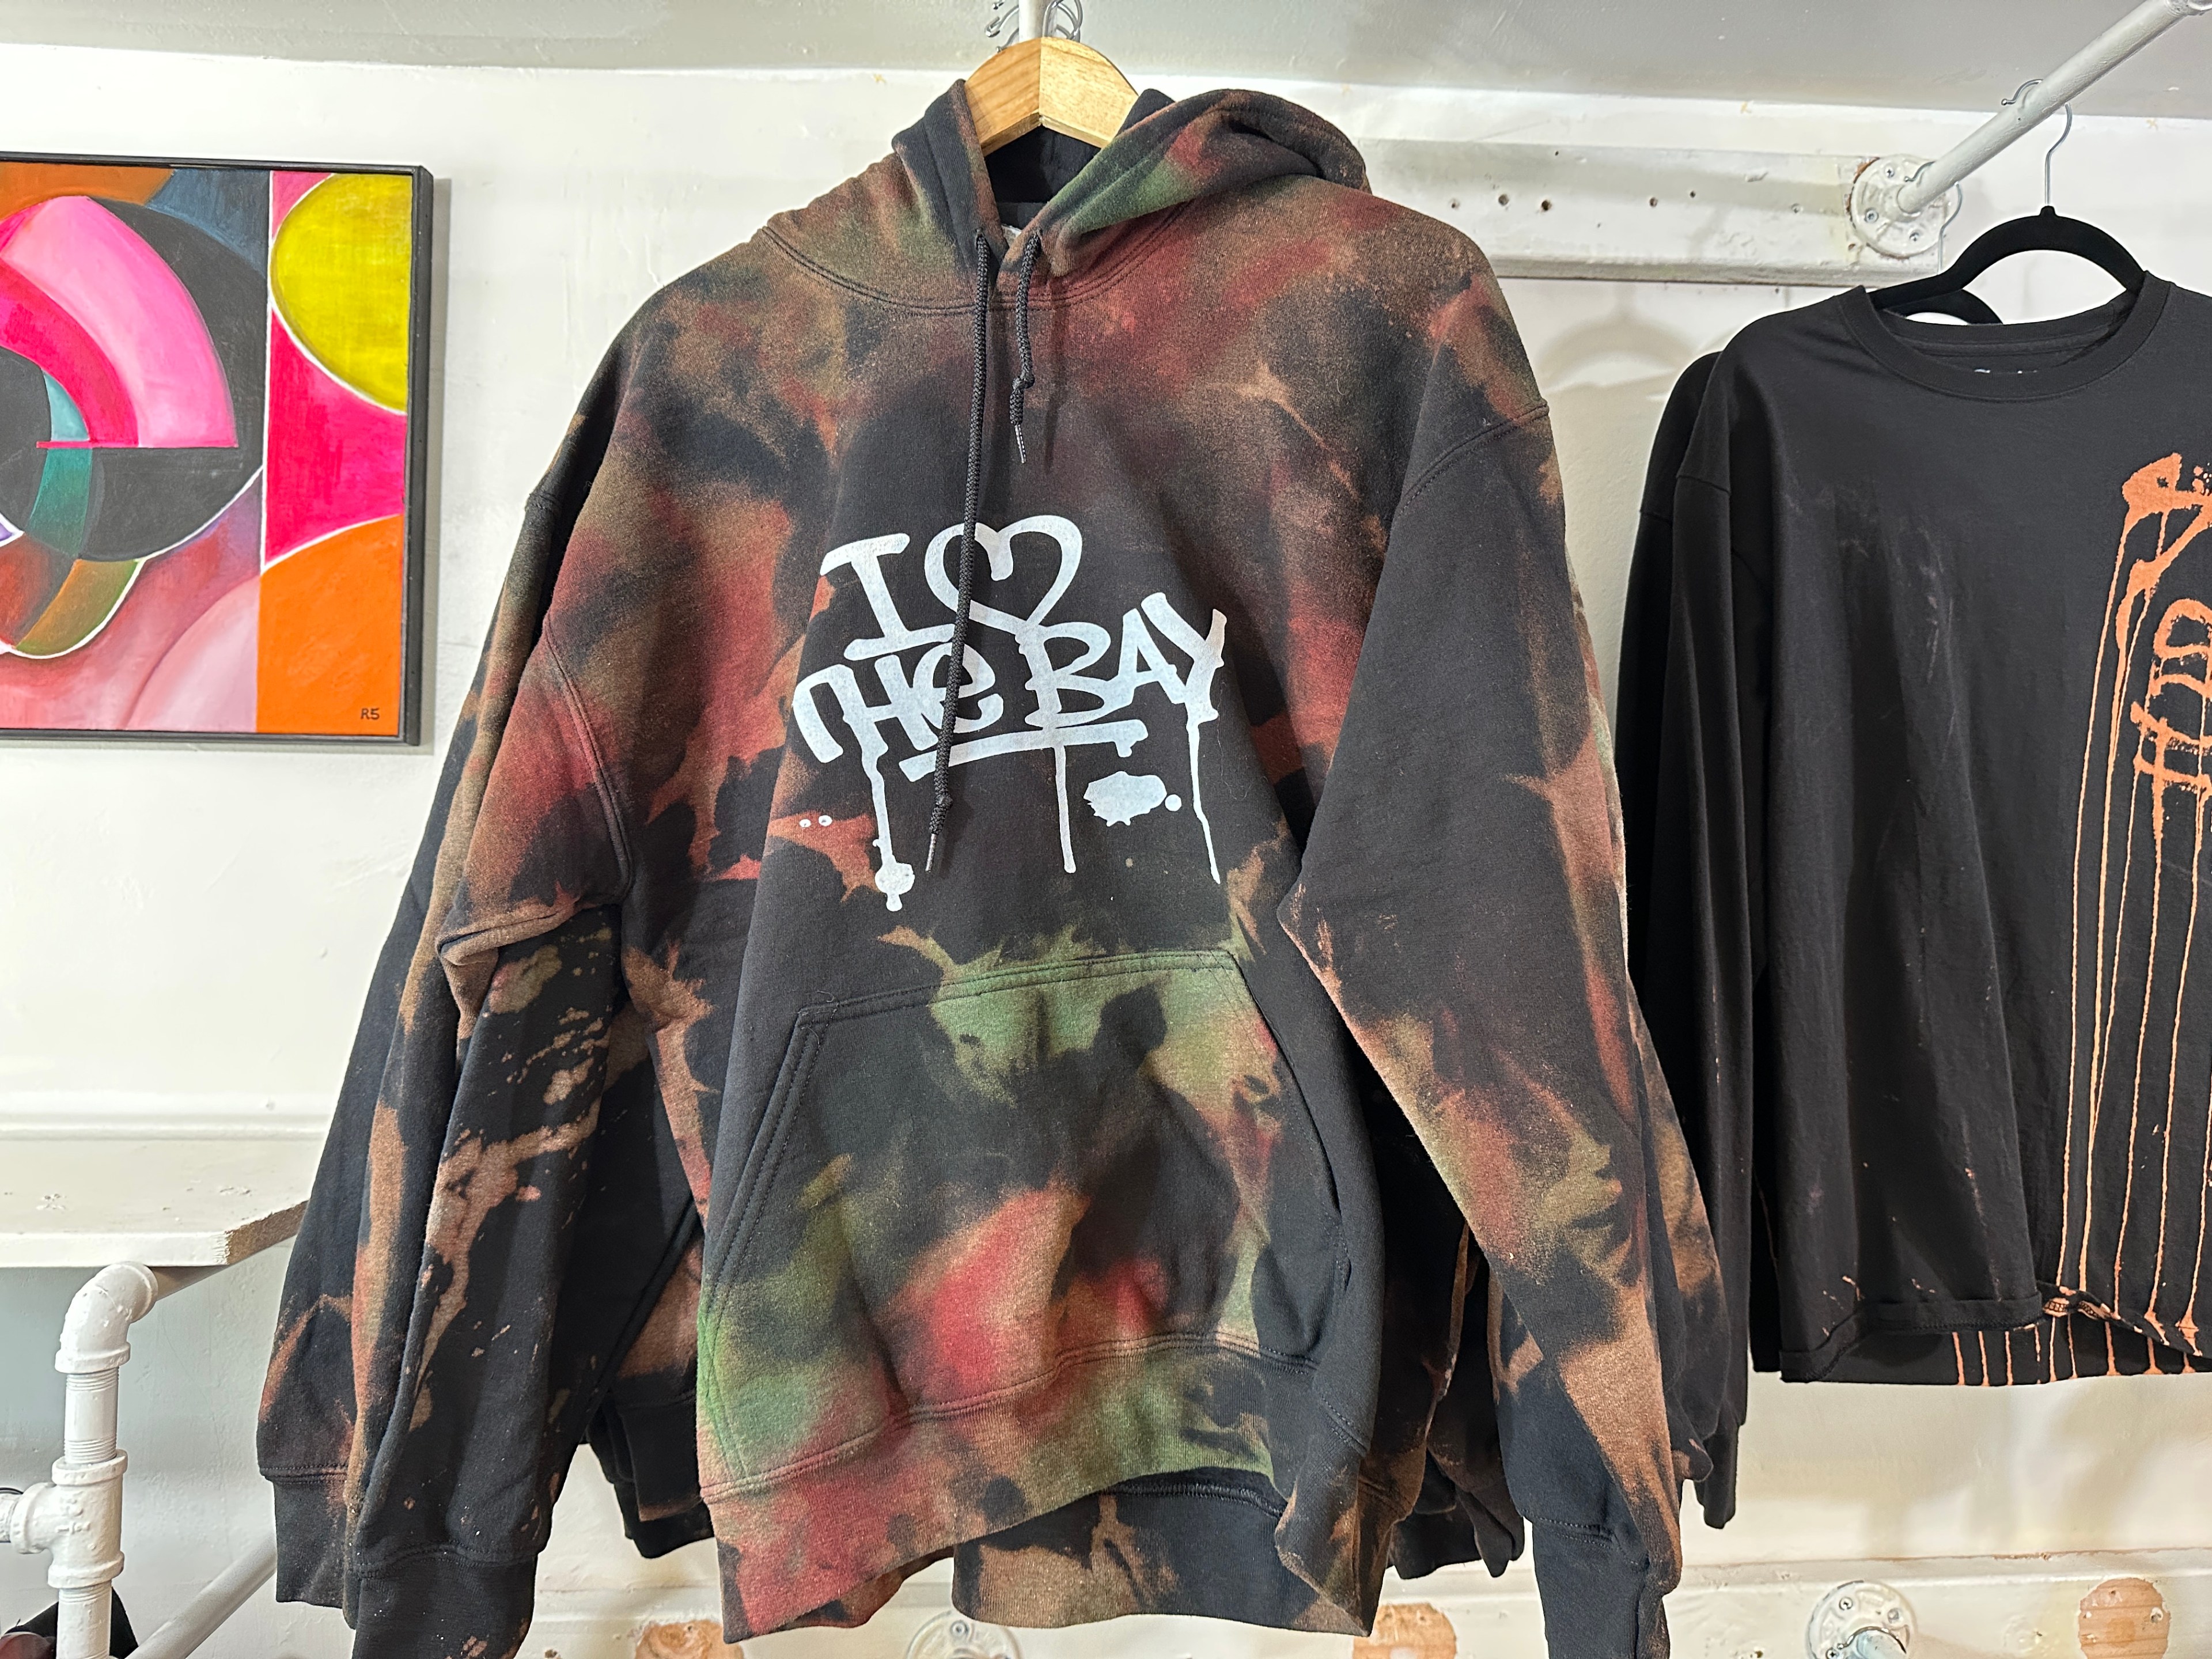 A hoodie with &quot;I Love the Bay&quot; graffiti lettering hangs in an art and apparel shop on Valencia Street in San Francisco.